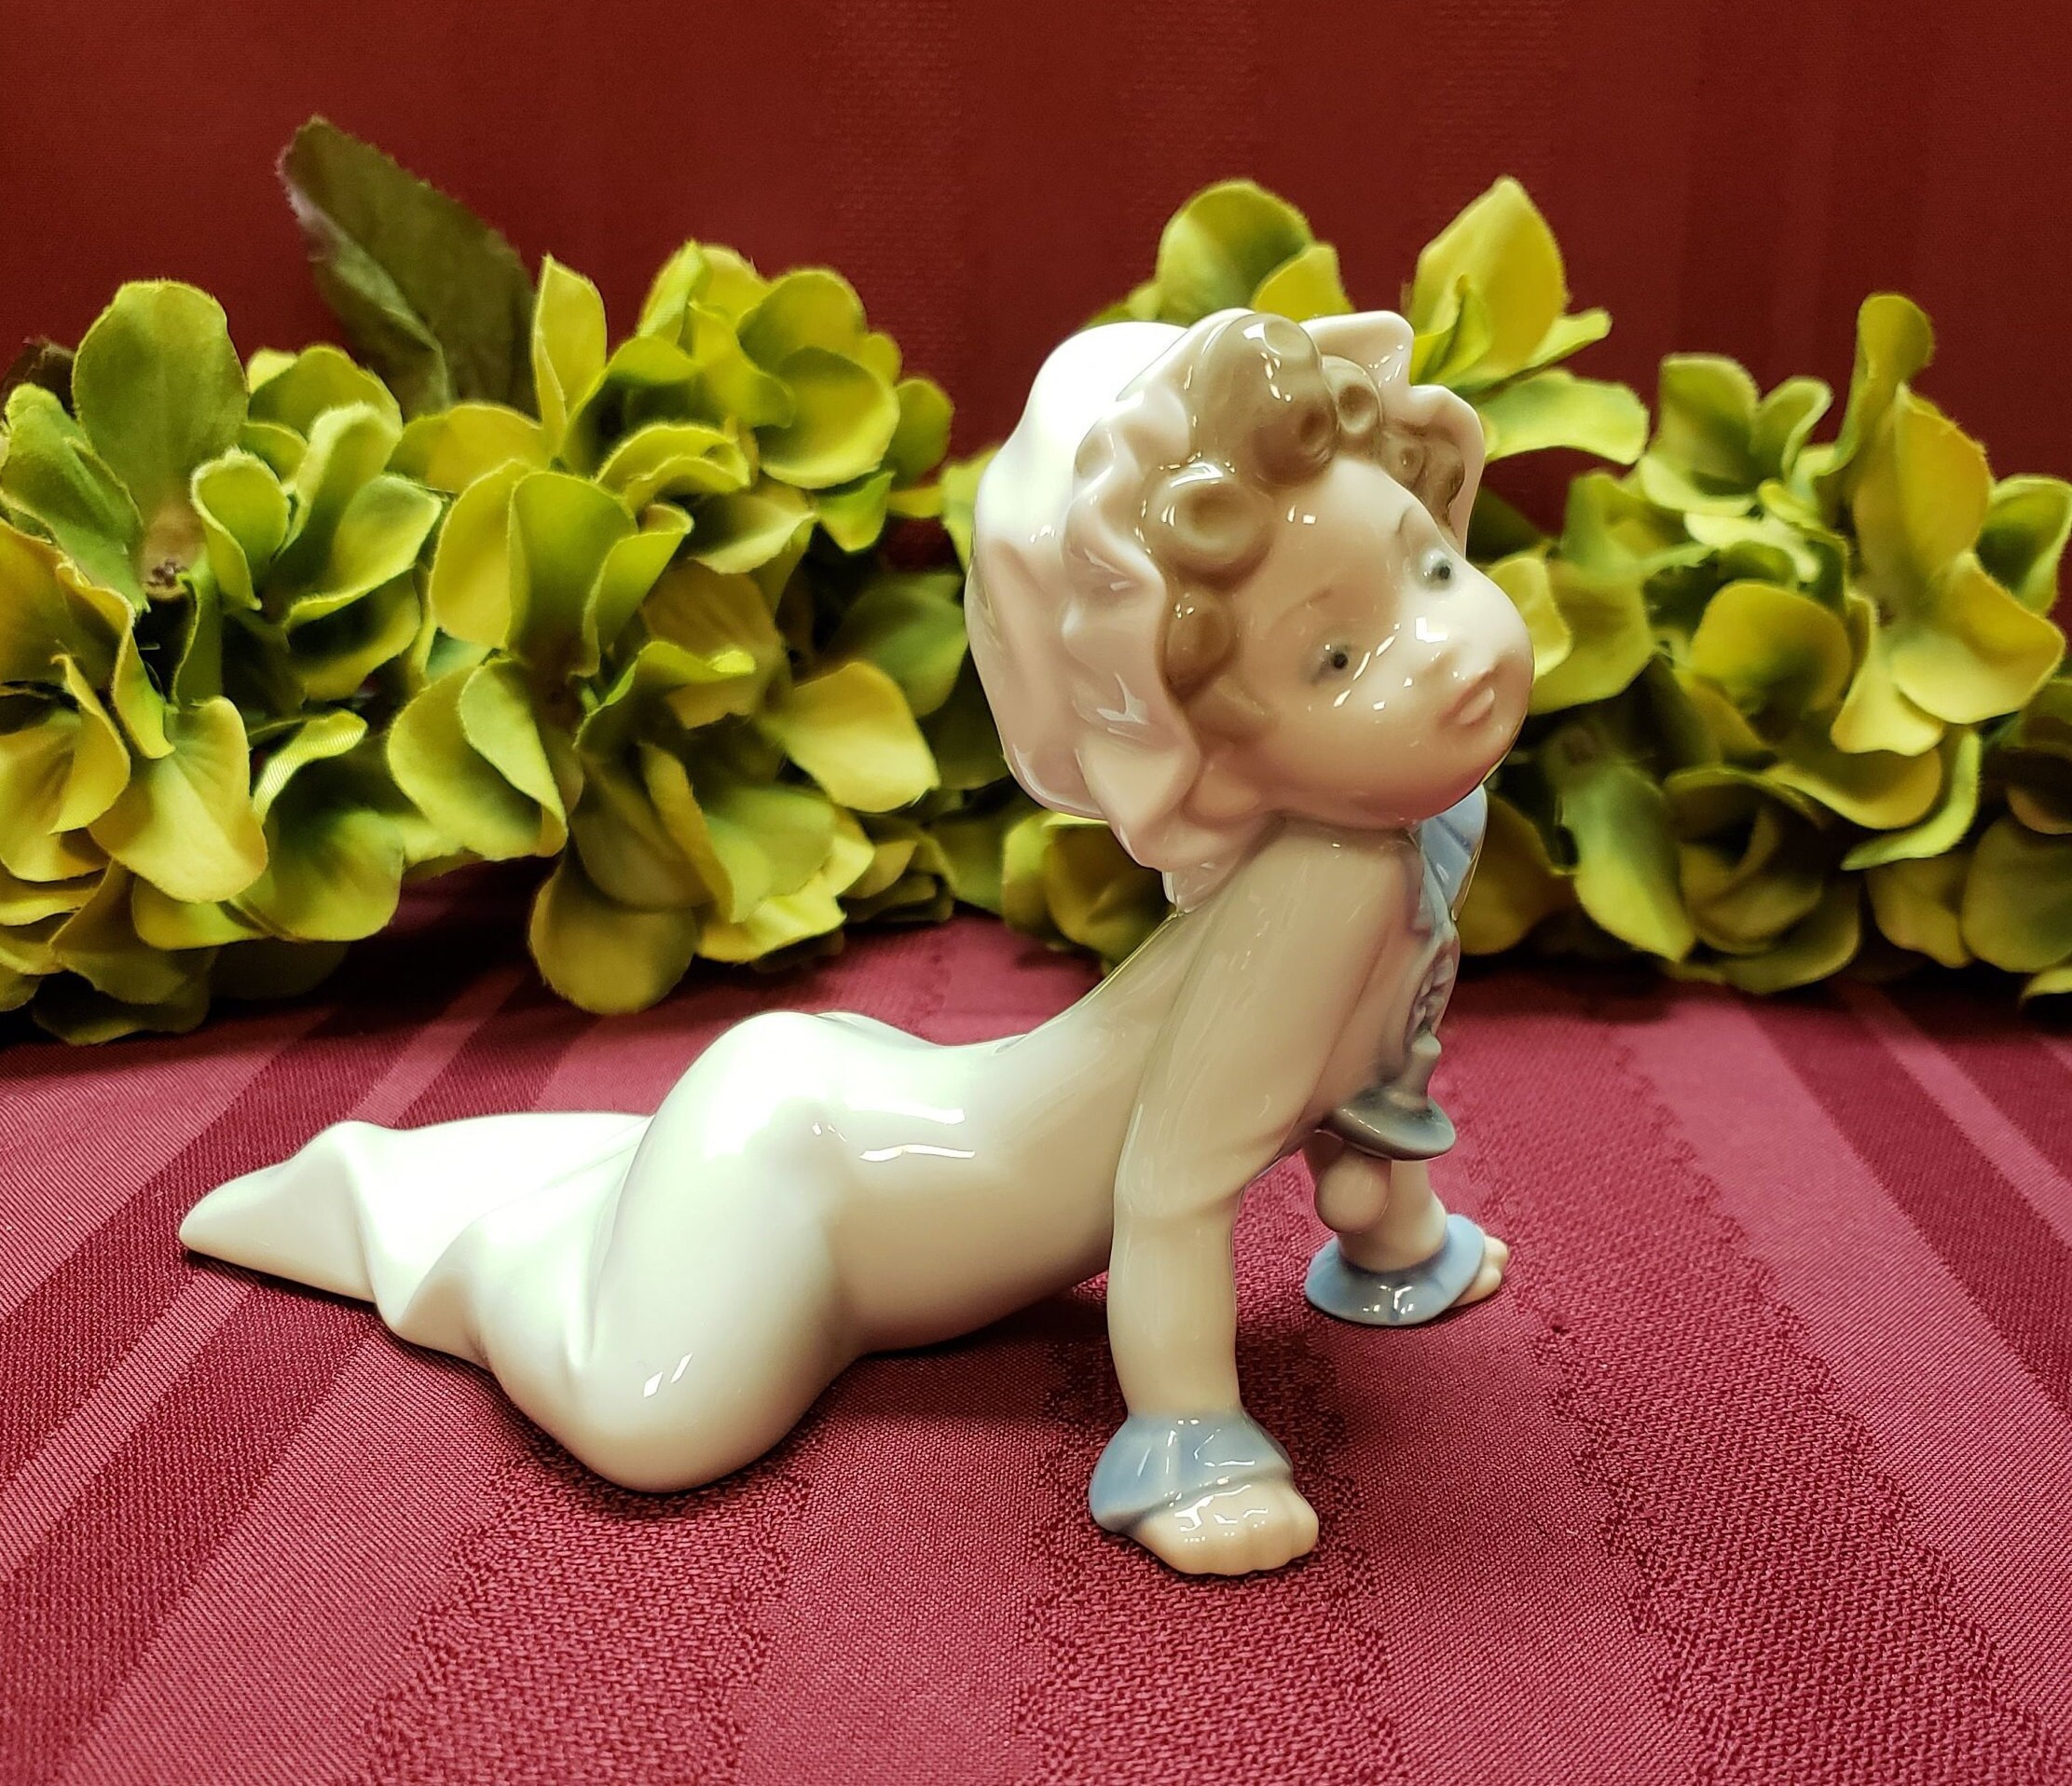 Vintage Torralba Porcelain Figurine Girl Holding Puppy Made in Spain Replacement Discounted VintageFindsFound